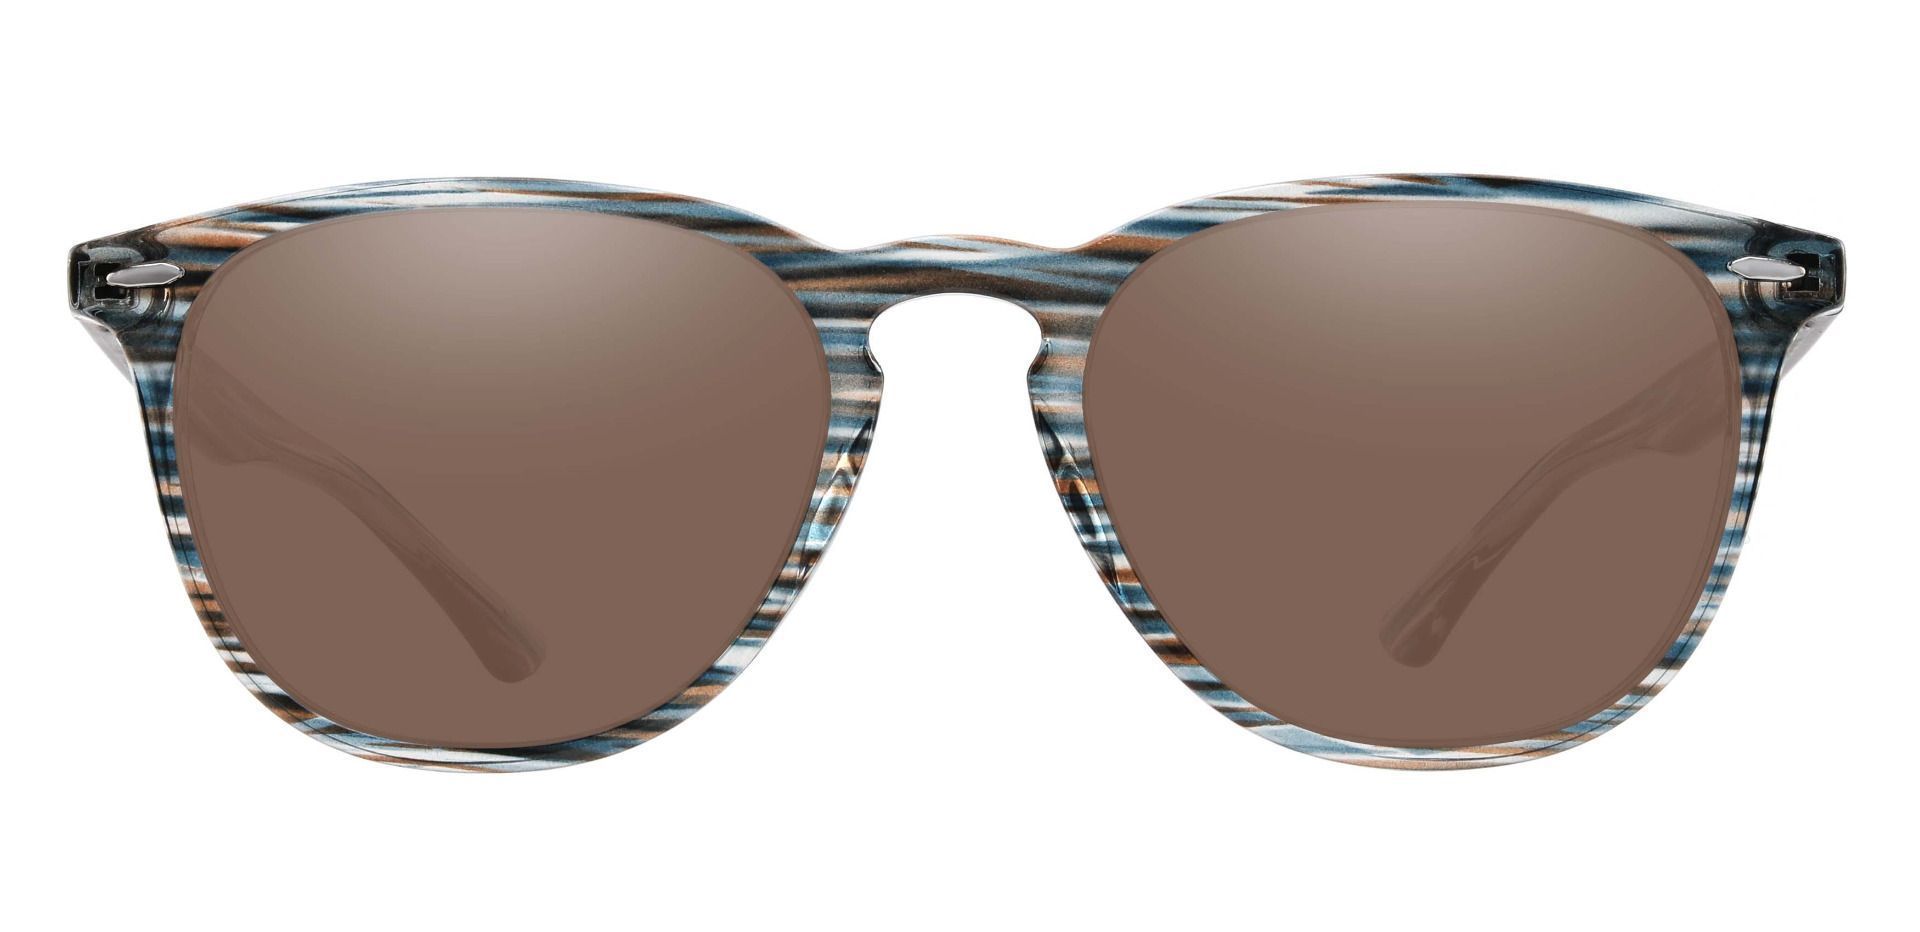 Sycamore Oval Lined Bifocal Sunglasses - Blue Frame With Brown Lenses